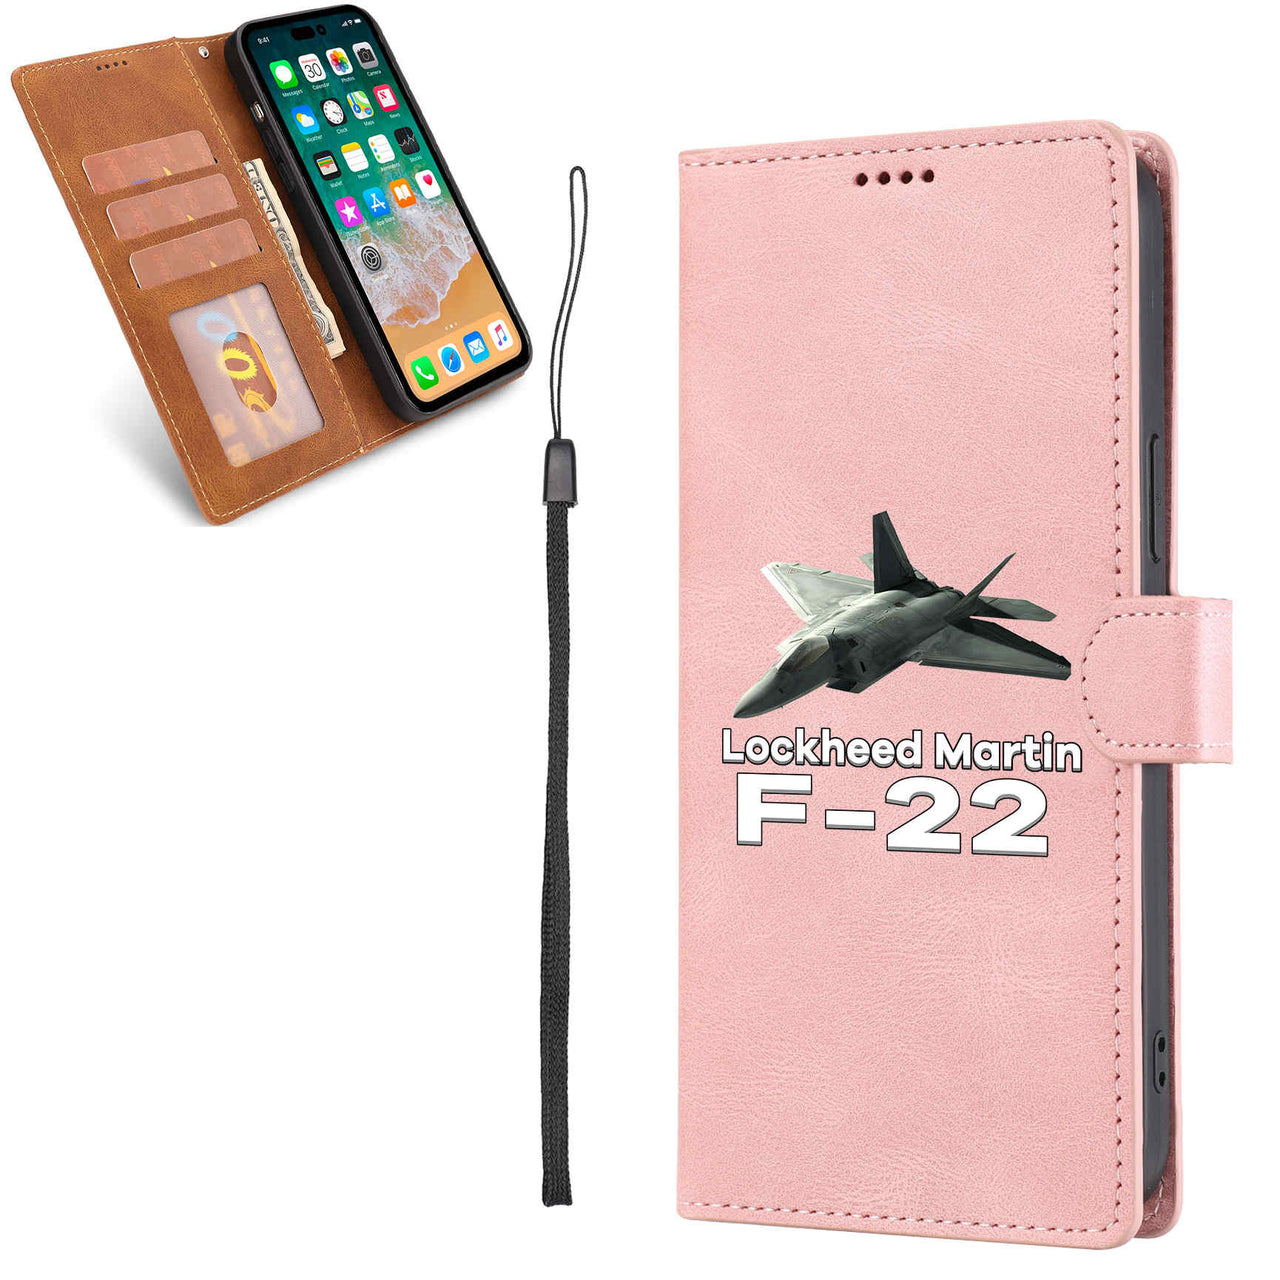 The Lockheed Martin F22 Designed Leather Samsung S & Note Cases